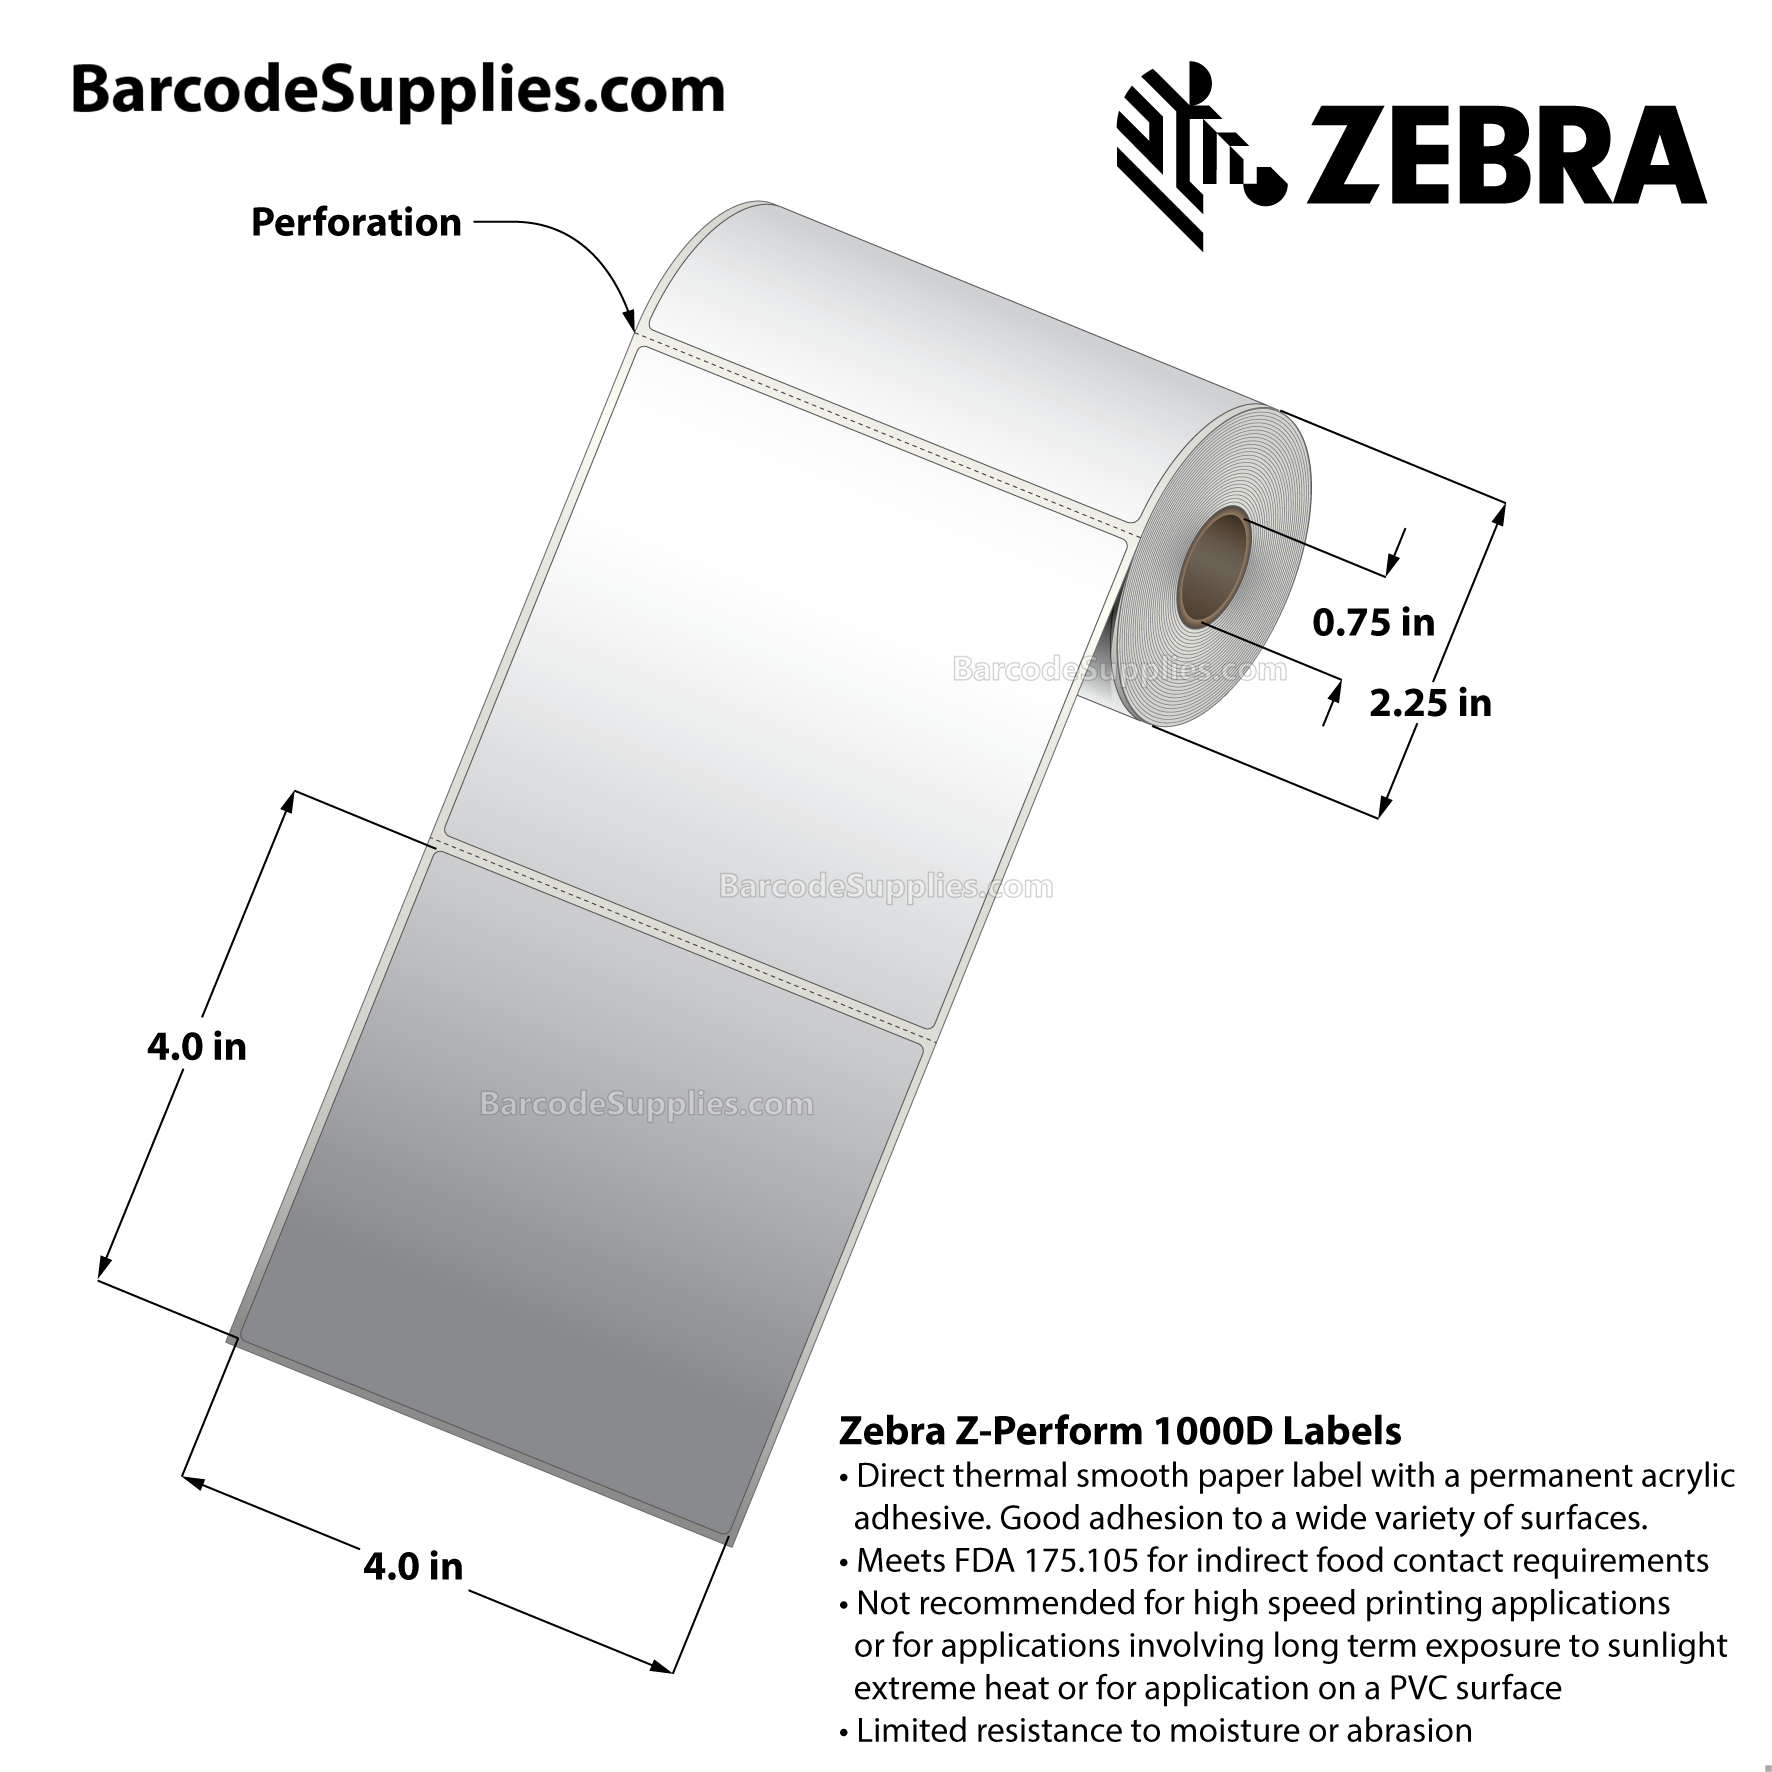 4 x 4 Direct Thermal White Z-Perform 1000D Labels With Permanent Adhesive - Perforated - 120 Labels Per Roll - Carton Of 36 Rolls - 4320 Labels Total - MPN: 10026374